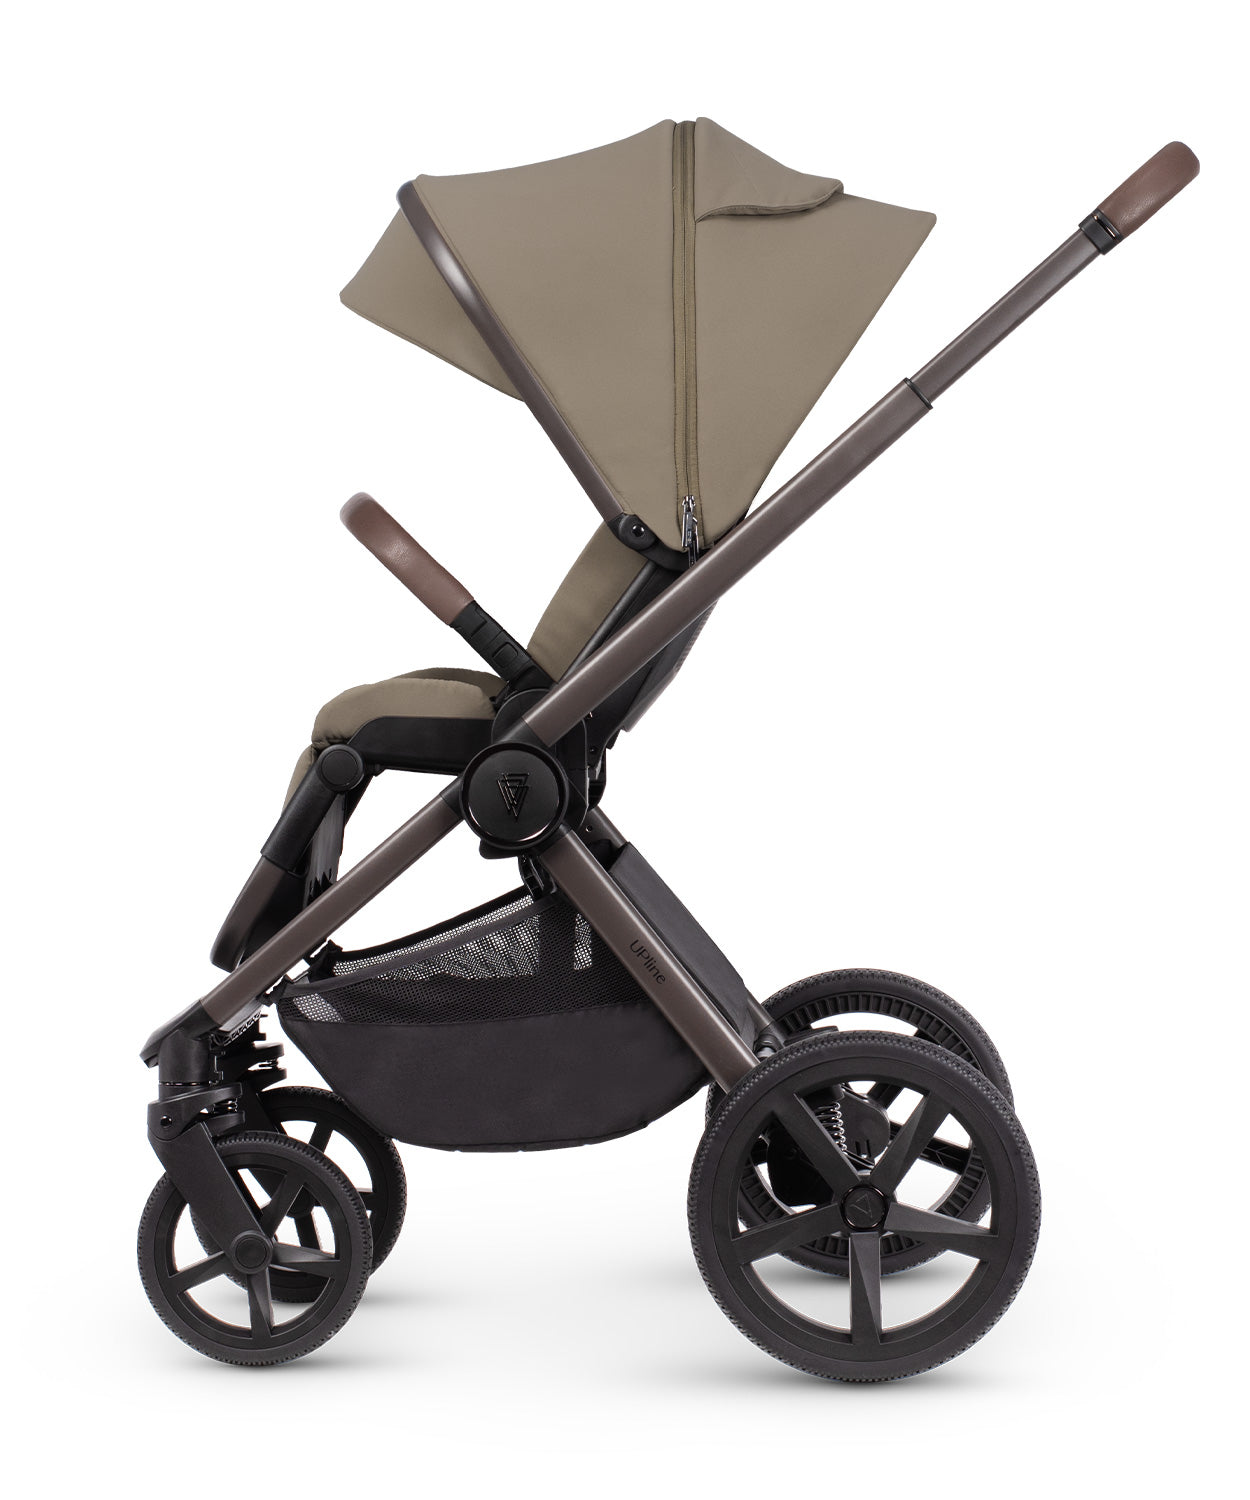 Venicci Tinum Upline SE 3 In 1 Travel System - Powder - For Your Little One